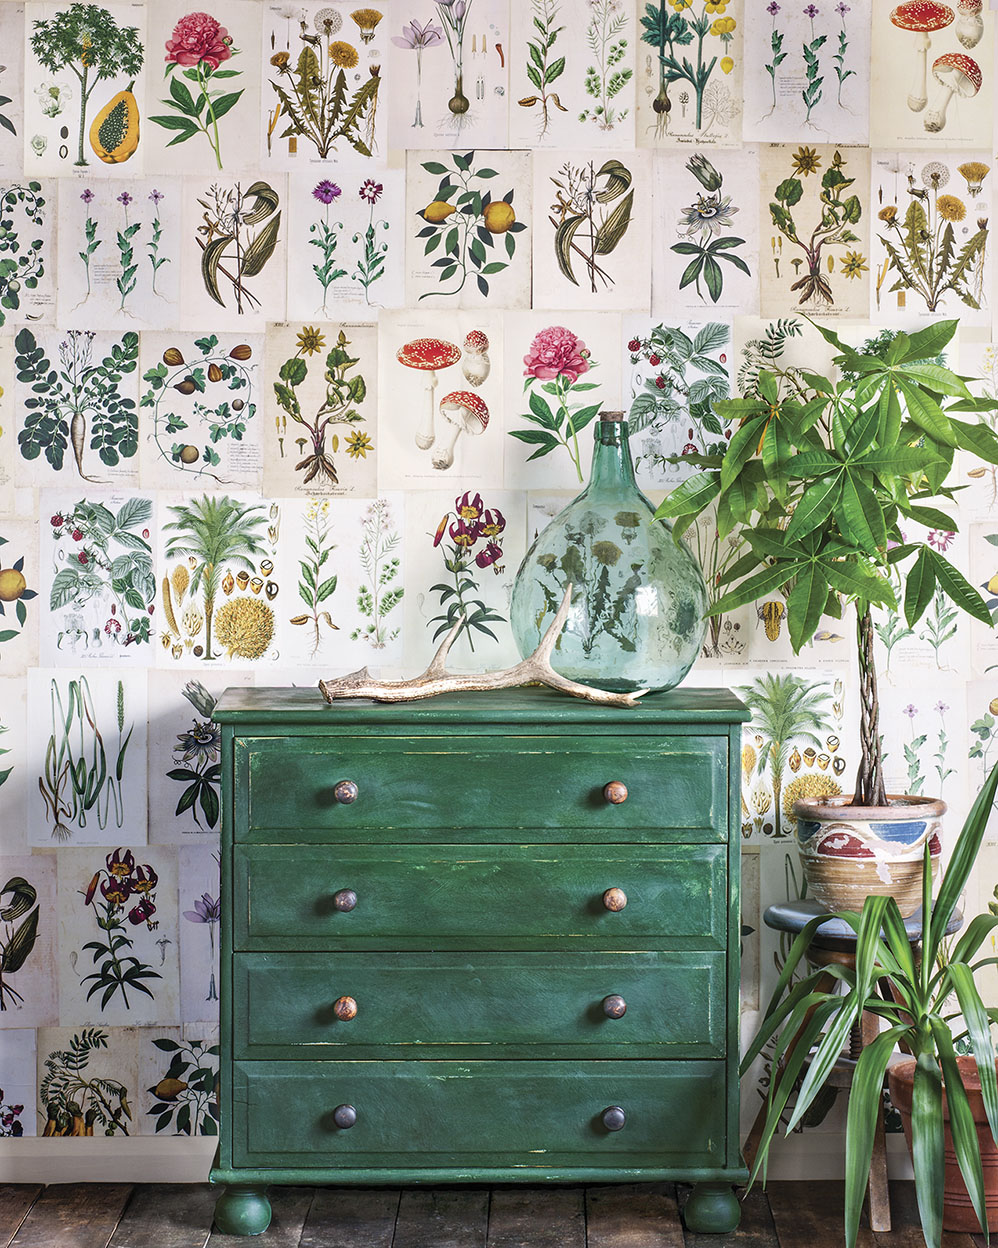 green chest in front of a wall decoupaged in botanical prints from a vintage book